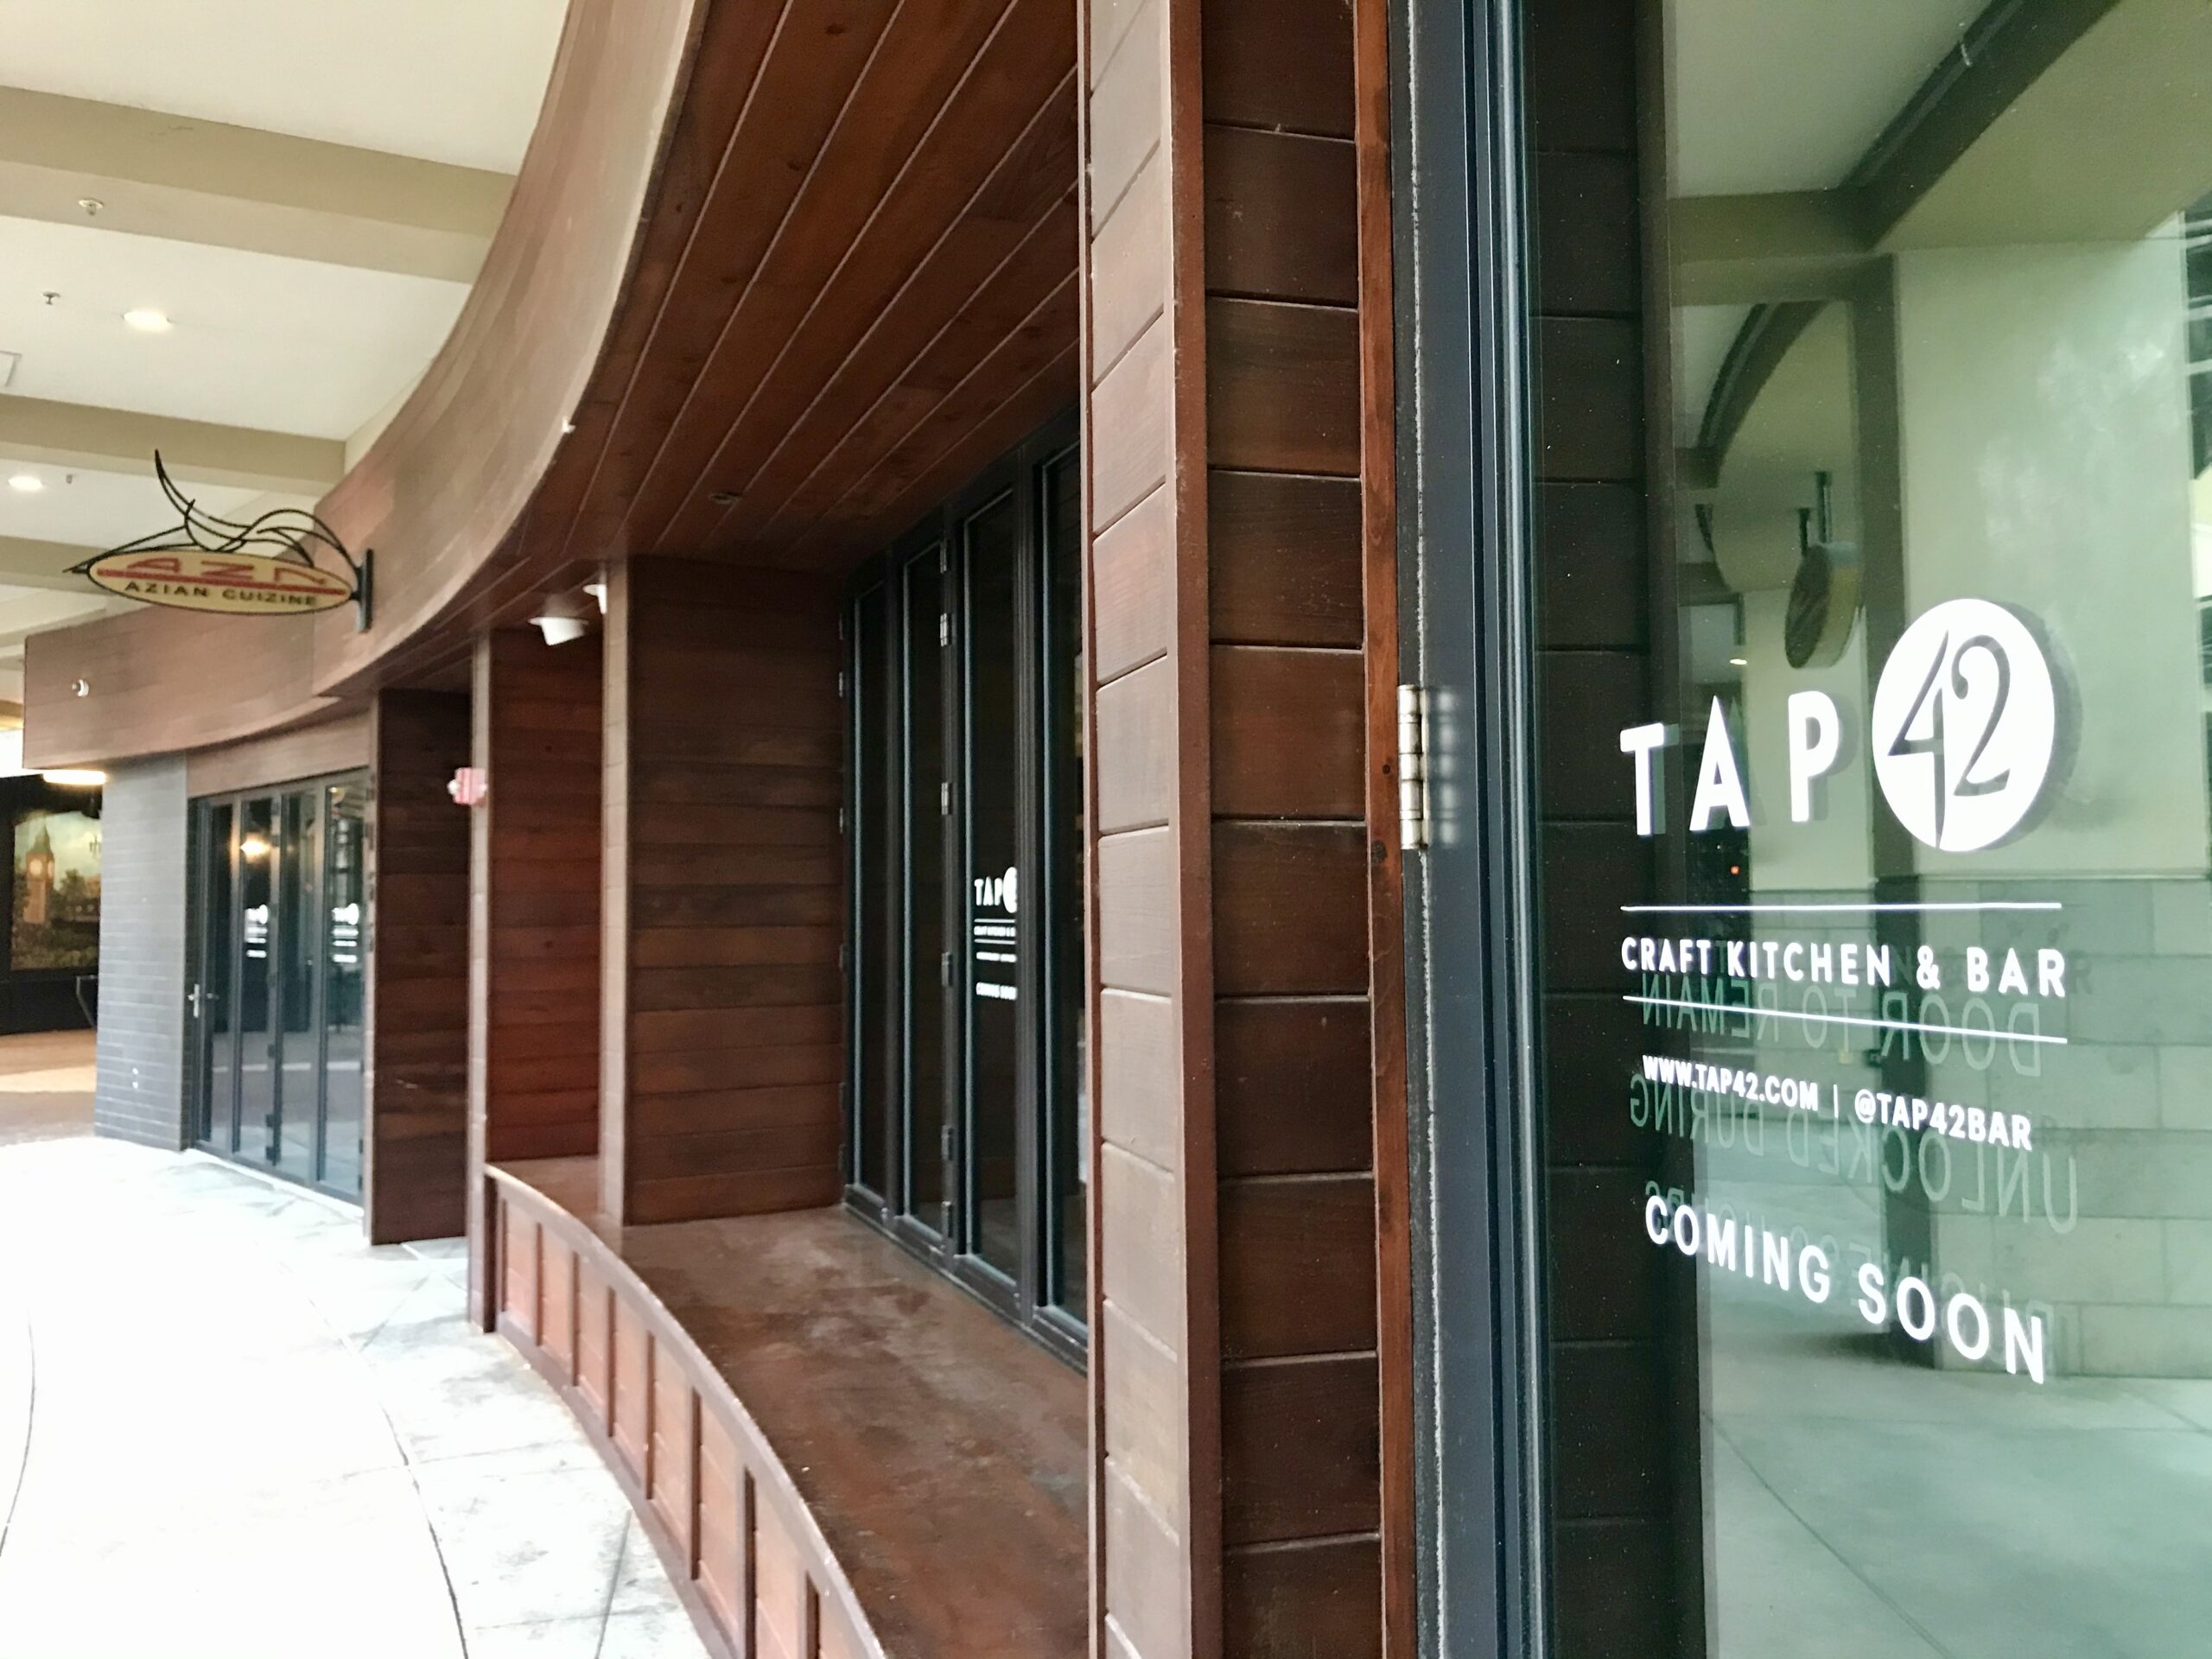 Tap 42 Craft Kitchen and Bar will replace AZN Asian Cuizine at Mercato.